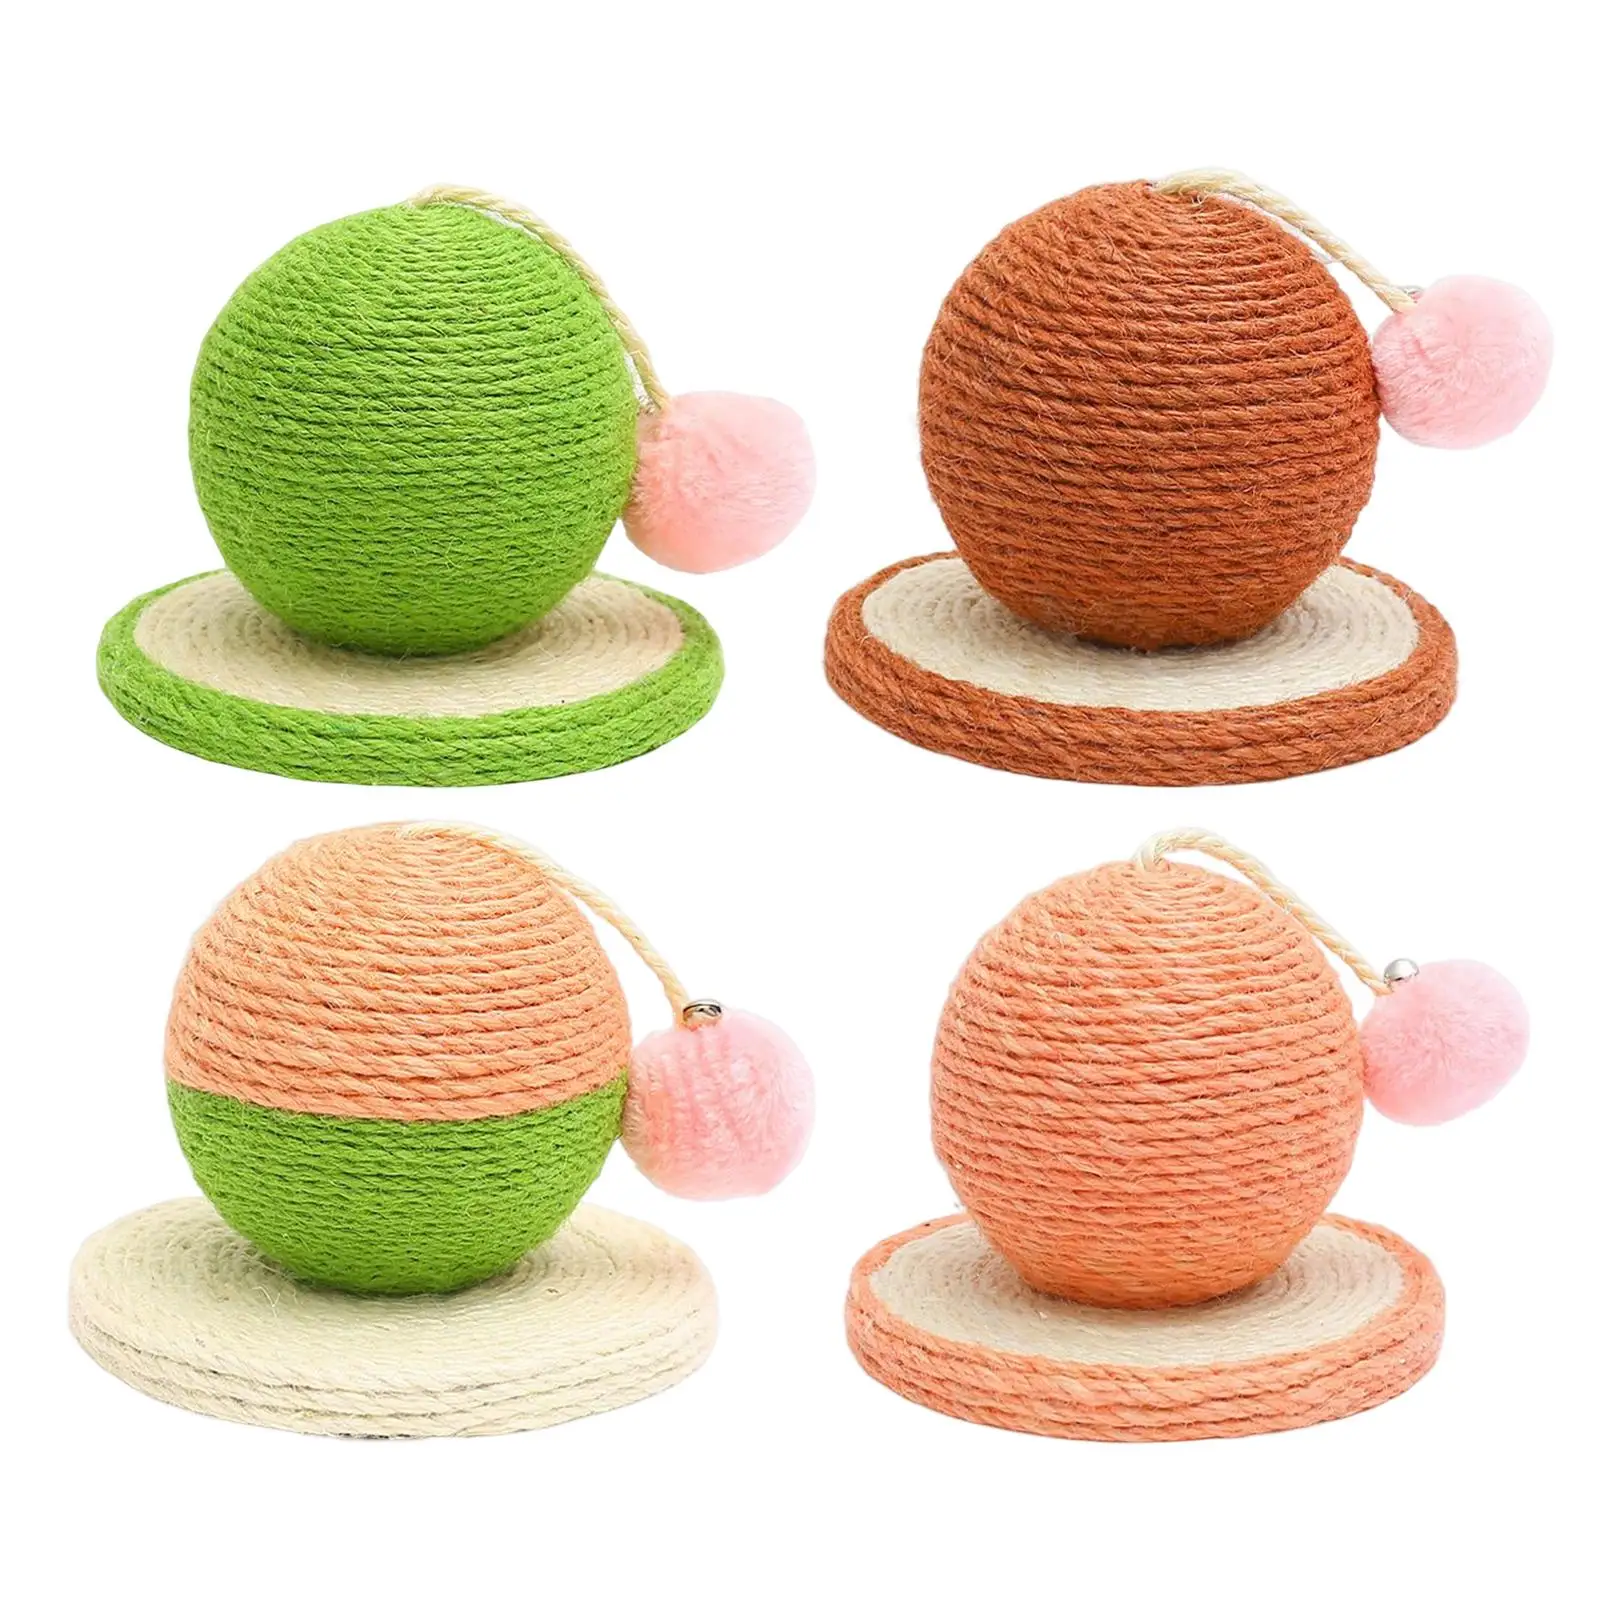 Cat Scratcher Ball Pet Supplies with Stand Furniture Protector Exercise Grind